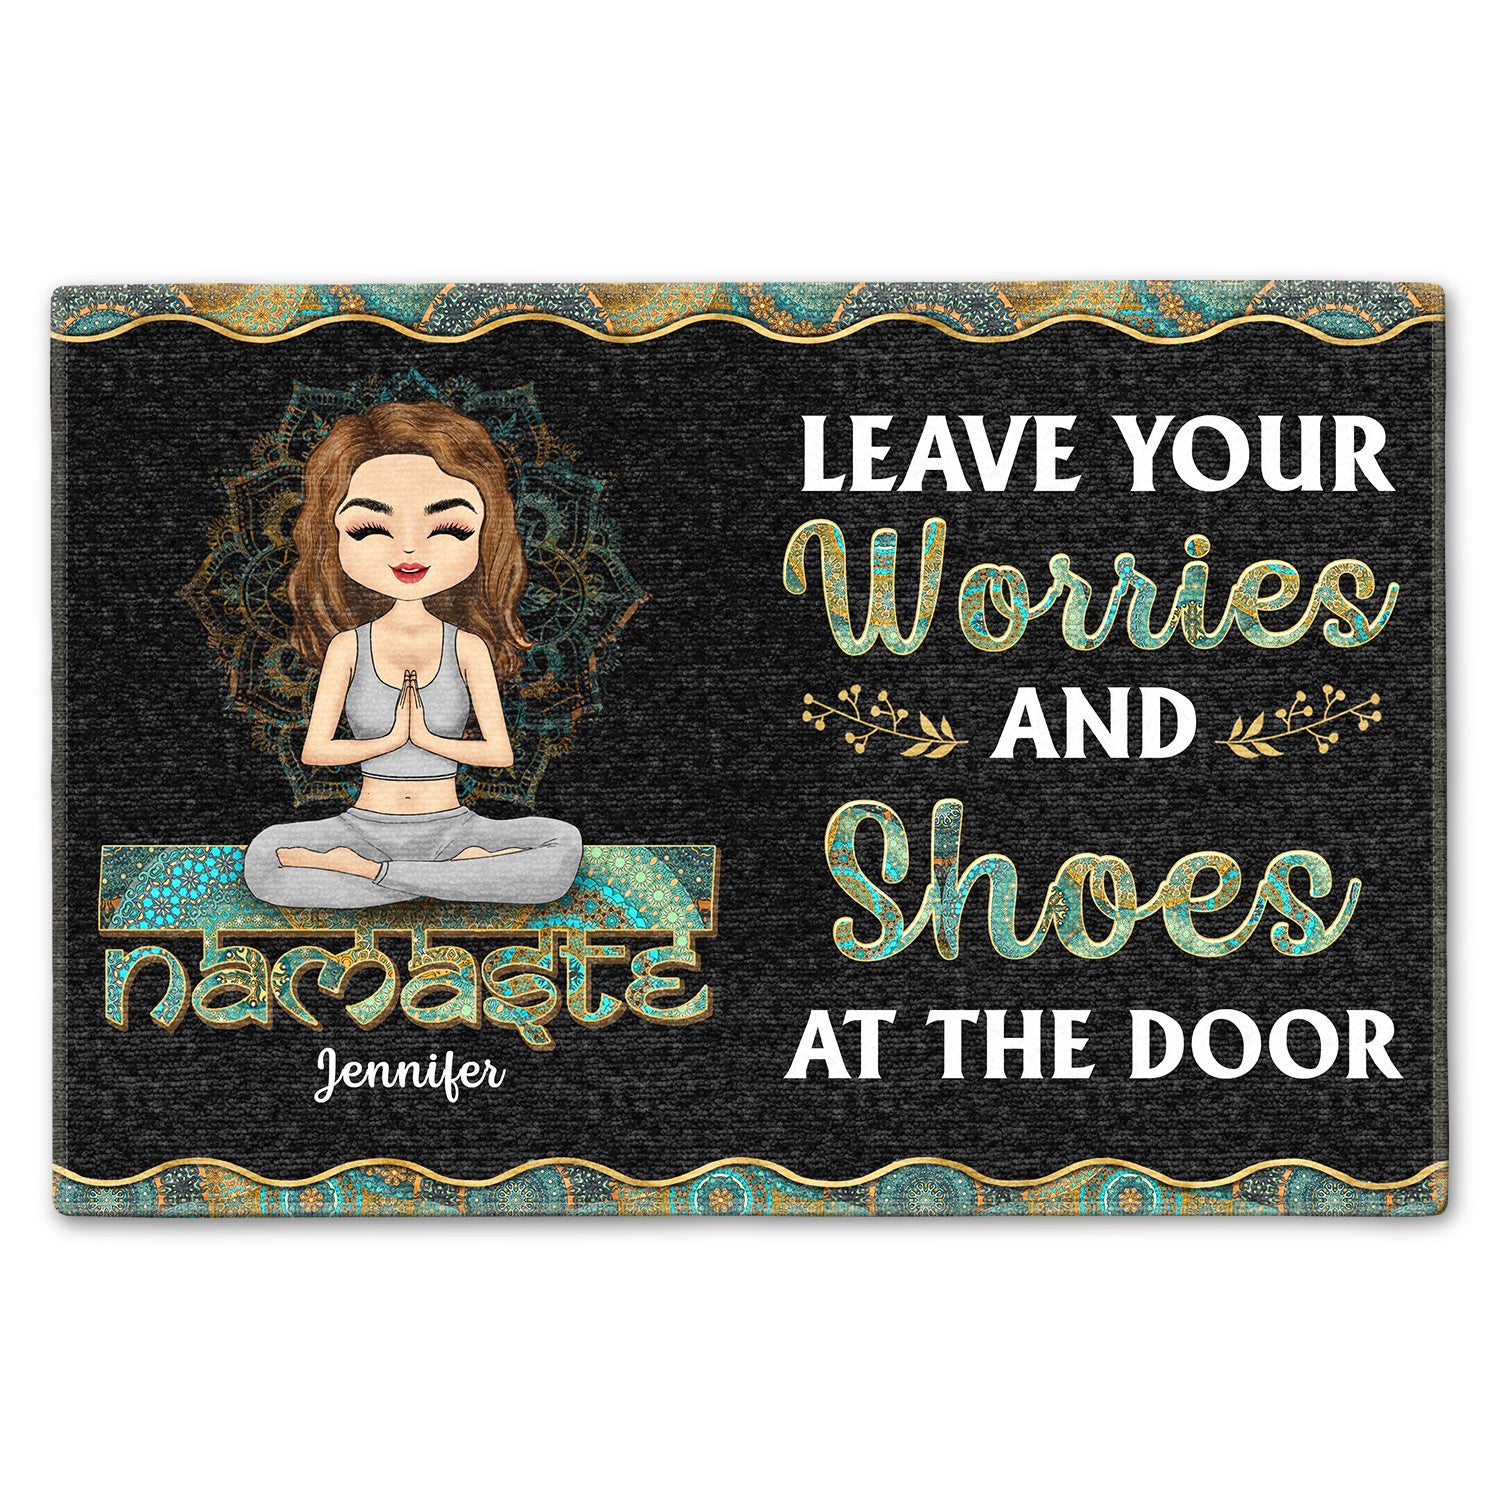 Leave Your Worries And Shoes At The Door - Home Decor, Birthday, Loving Gift For Yourself, Women, Yoga Lovers - Personalized Custom Doormat